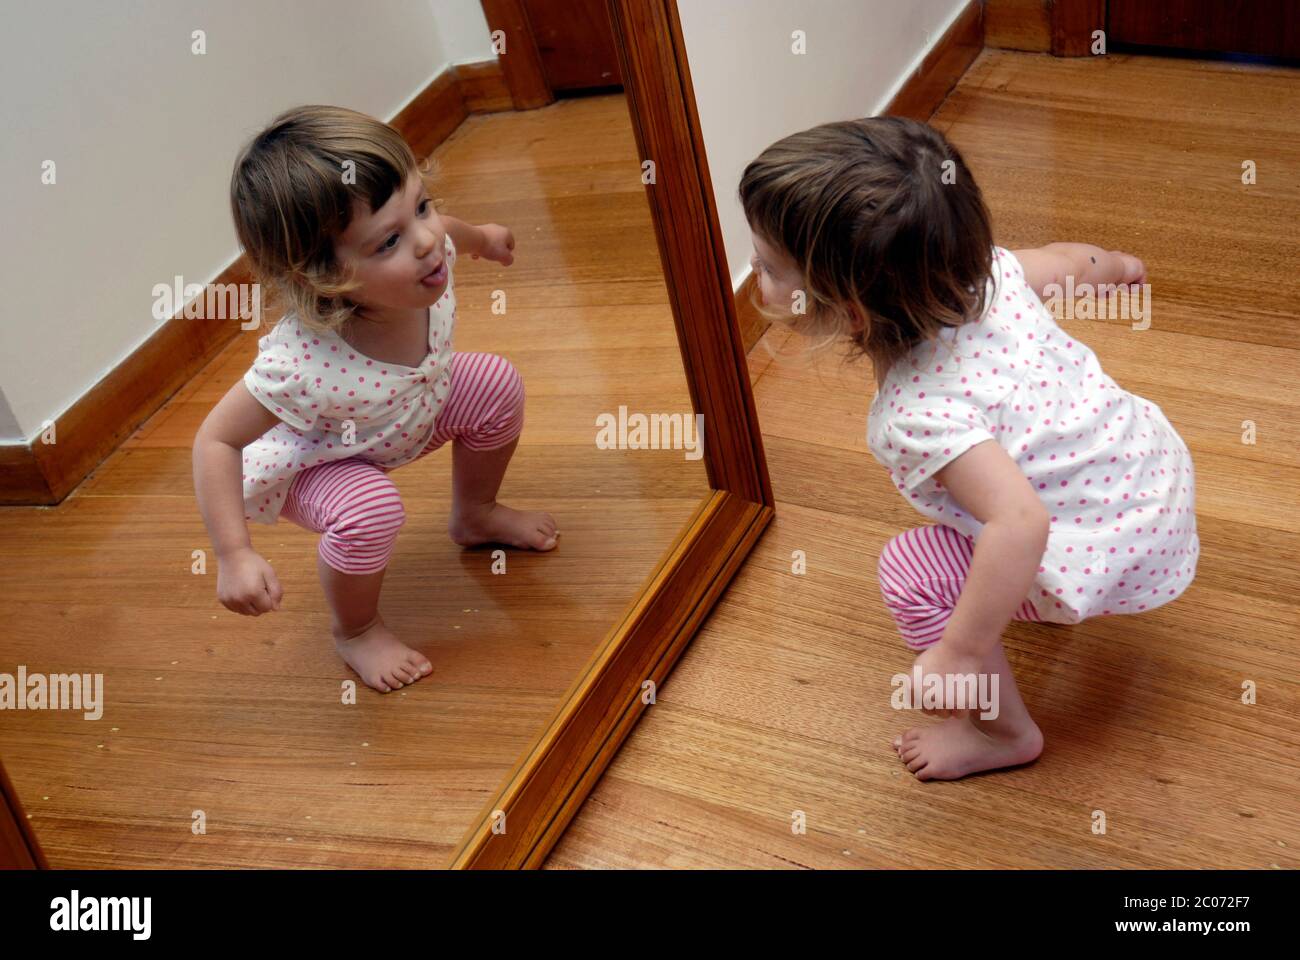 A young girl, two and a half years old, playing in front of a large mirror. Stock Photo